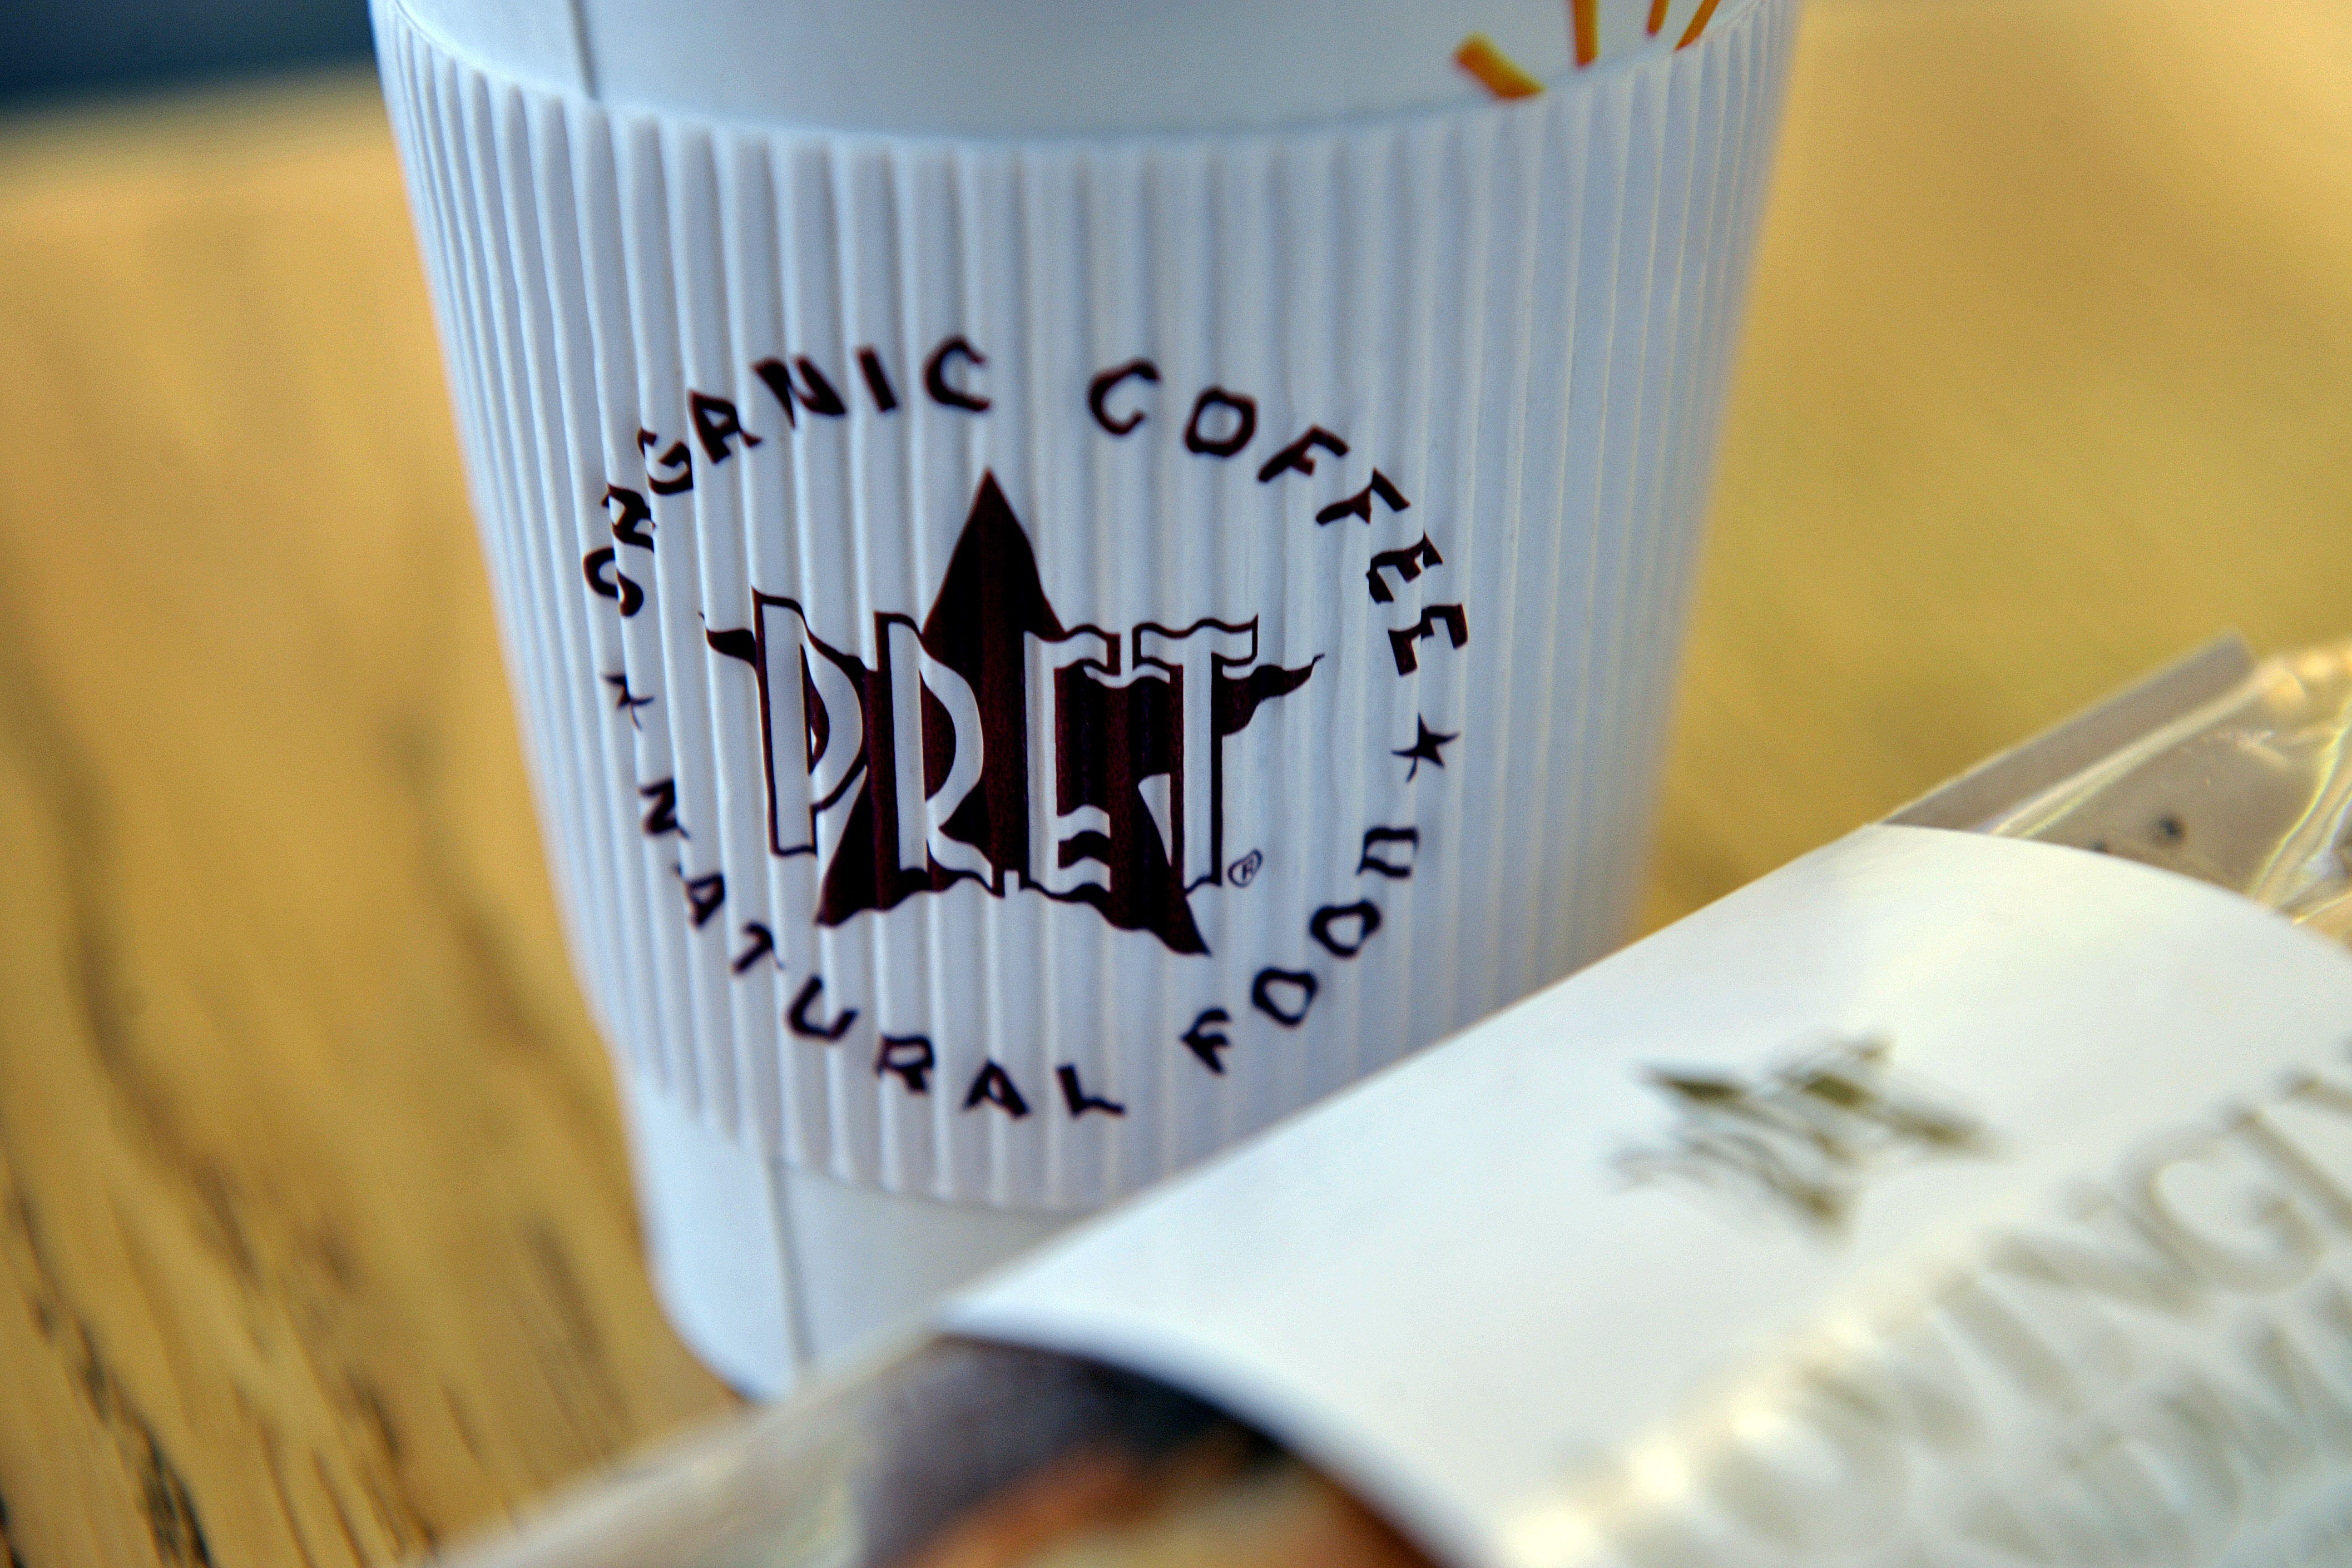 Pret is a favourite down south